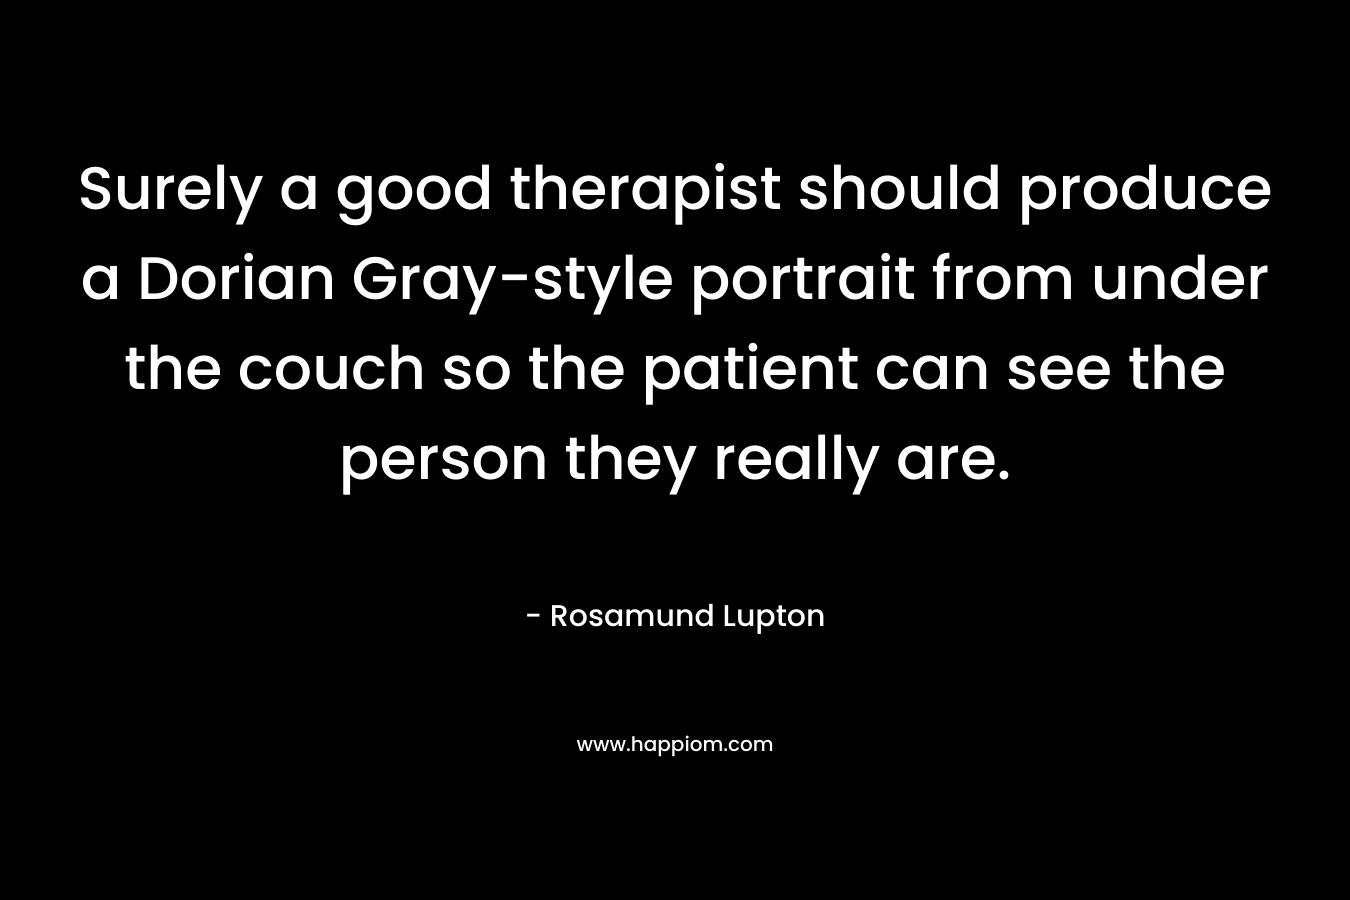 Surely a good therapist should produce a Dorian Gray-style portrait from under the couch so the patient can see the person they really are. – Rosamund Lupton